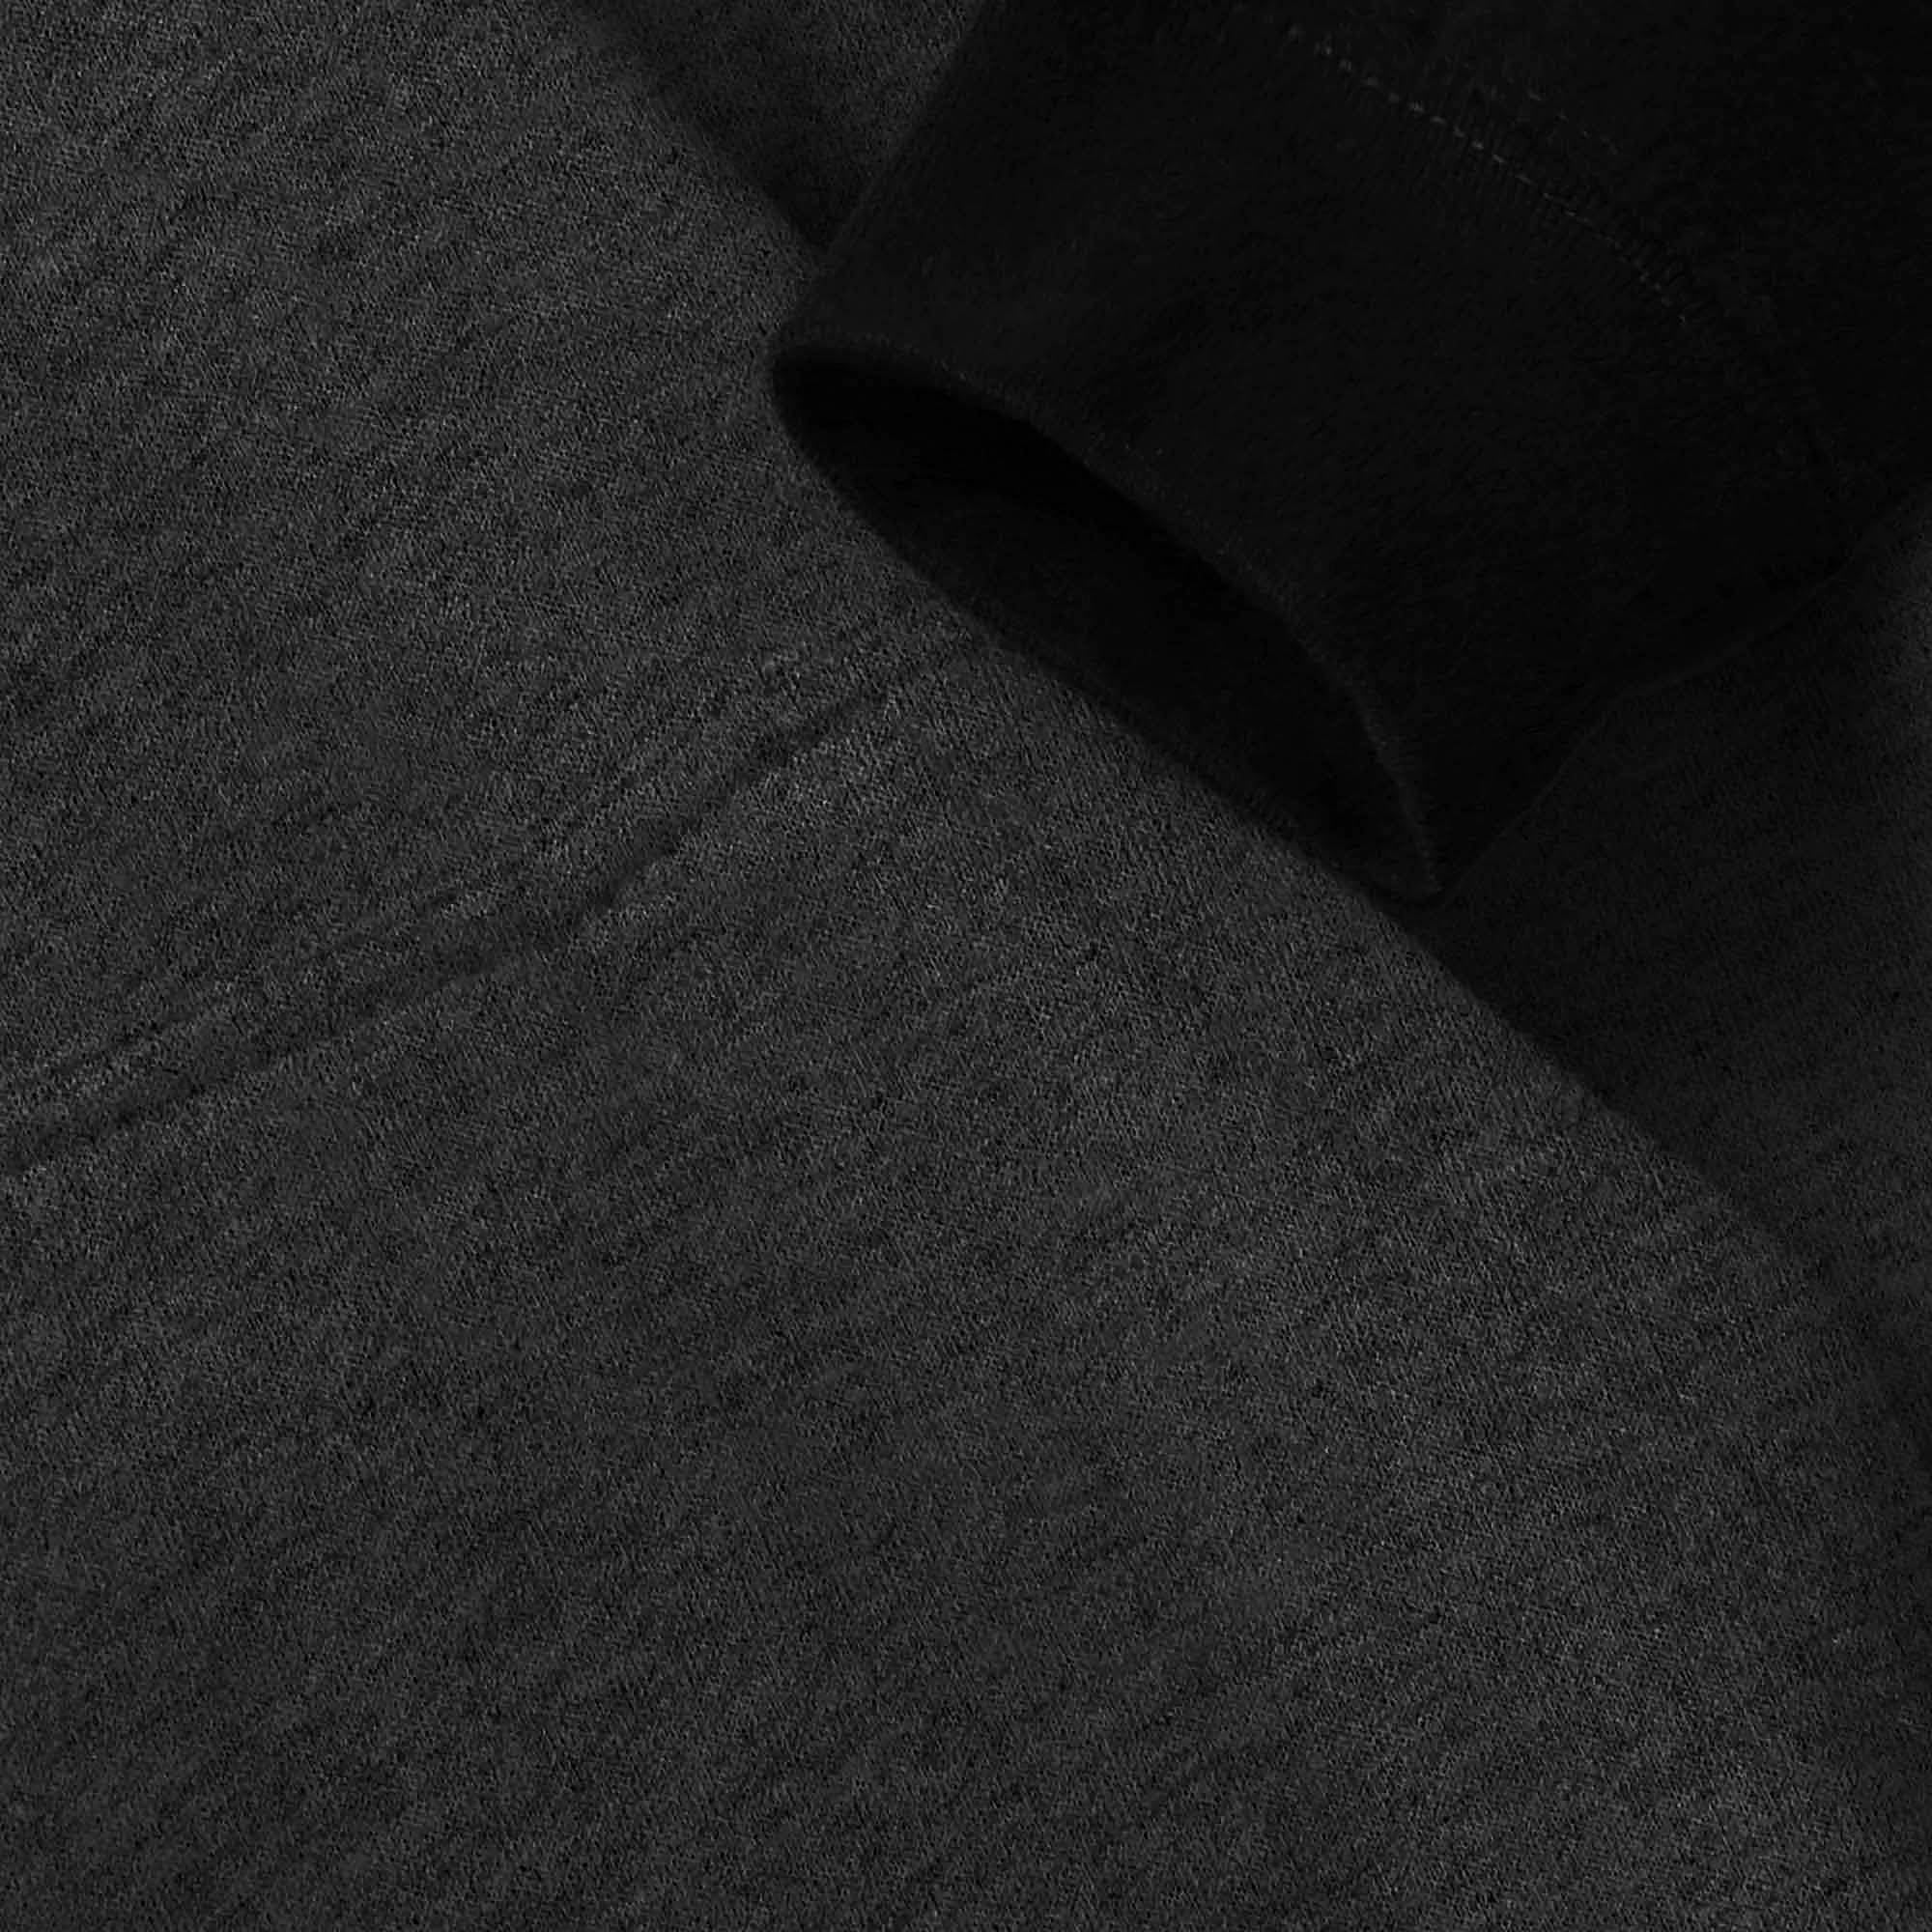 pullover hoodie_mens pullover hoodie_pullover sweatshirt_champion pullover hoodie_pullover adidas_hooded pullover_Charcoal/Black